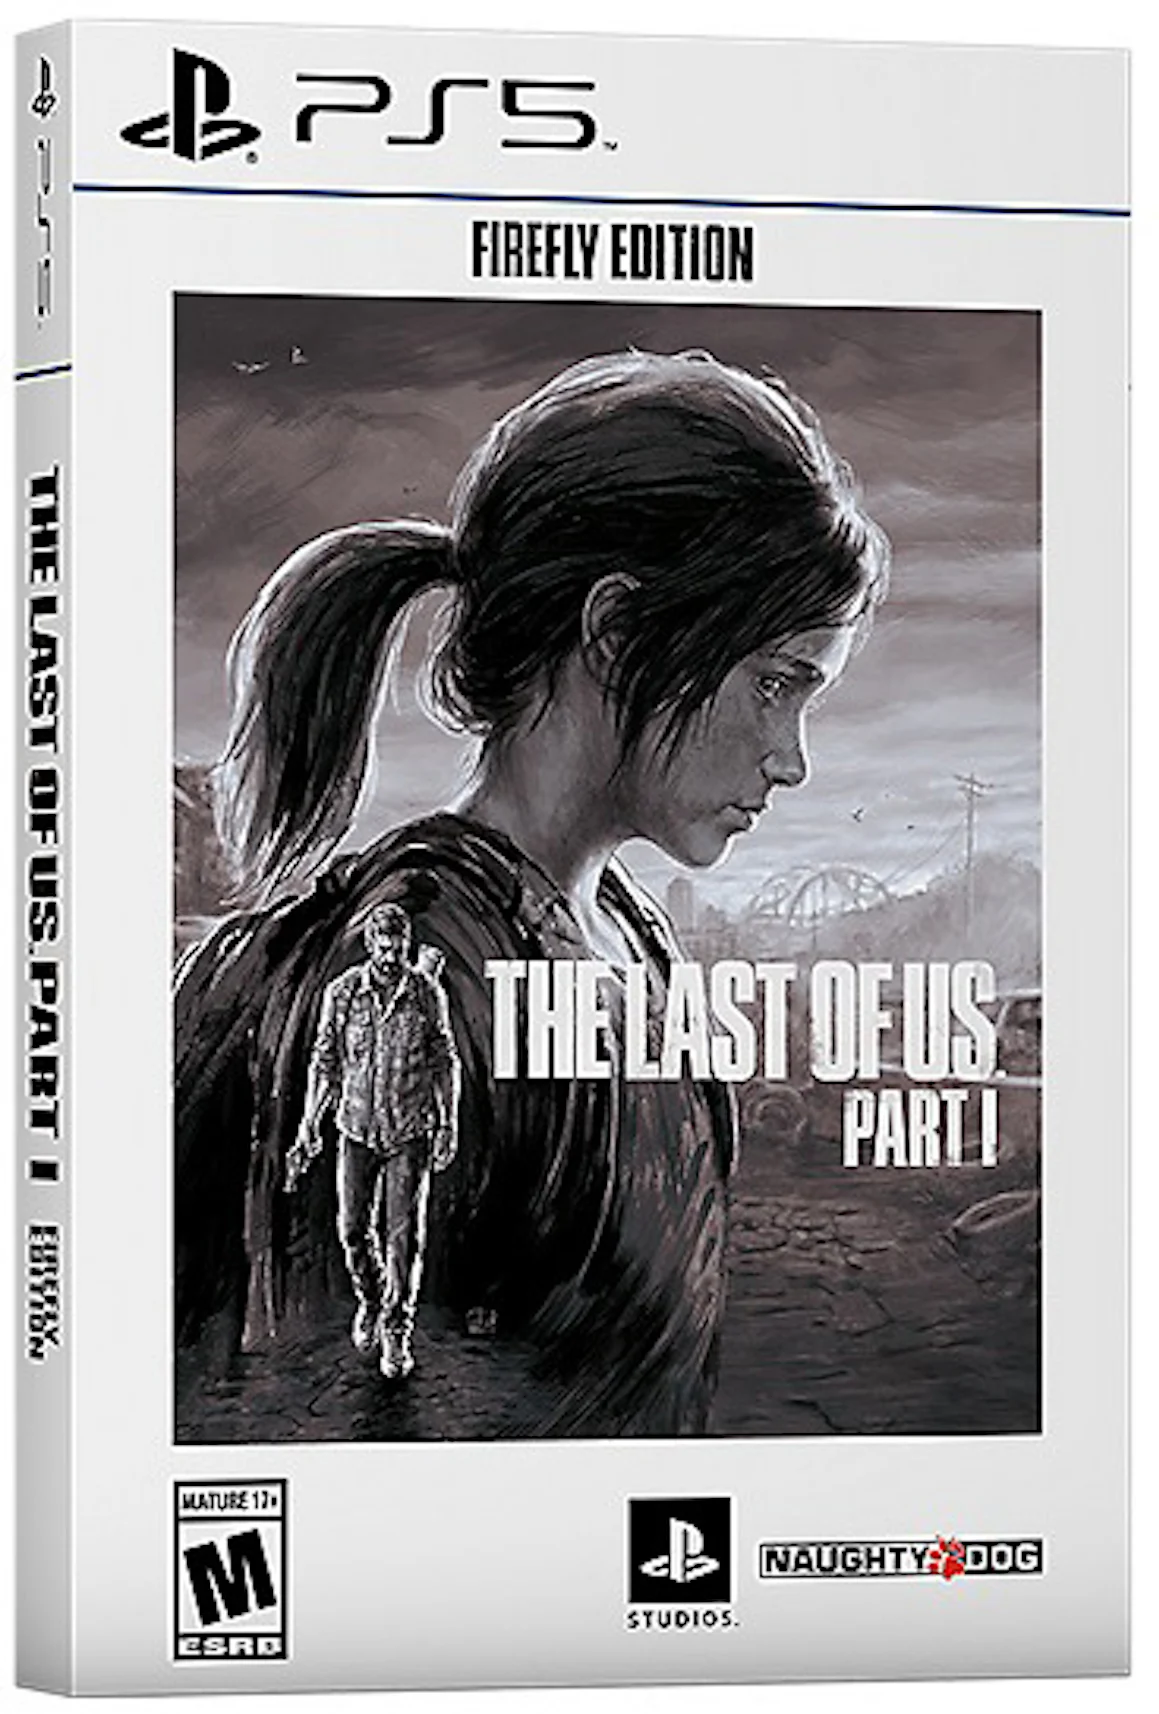 THE LAST OF US PARTE 1 - PS5 DIGITAL - Play For Fun